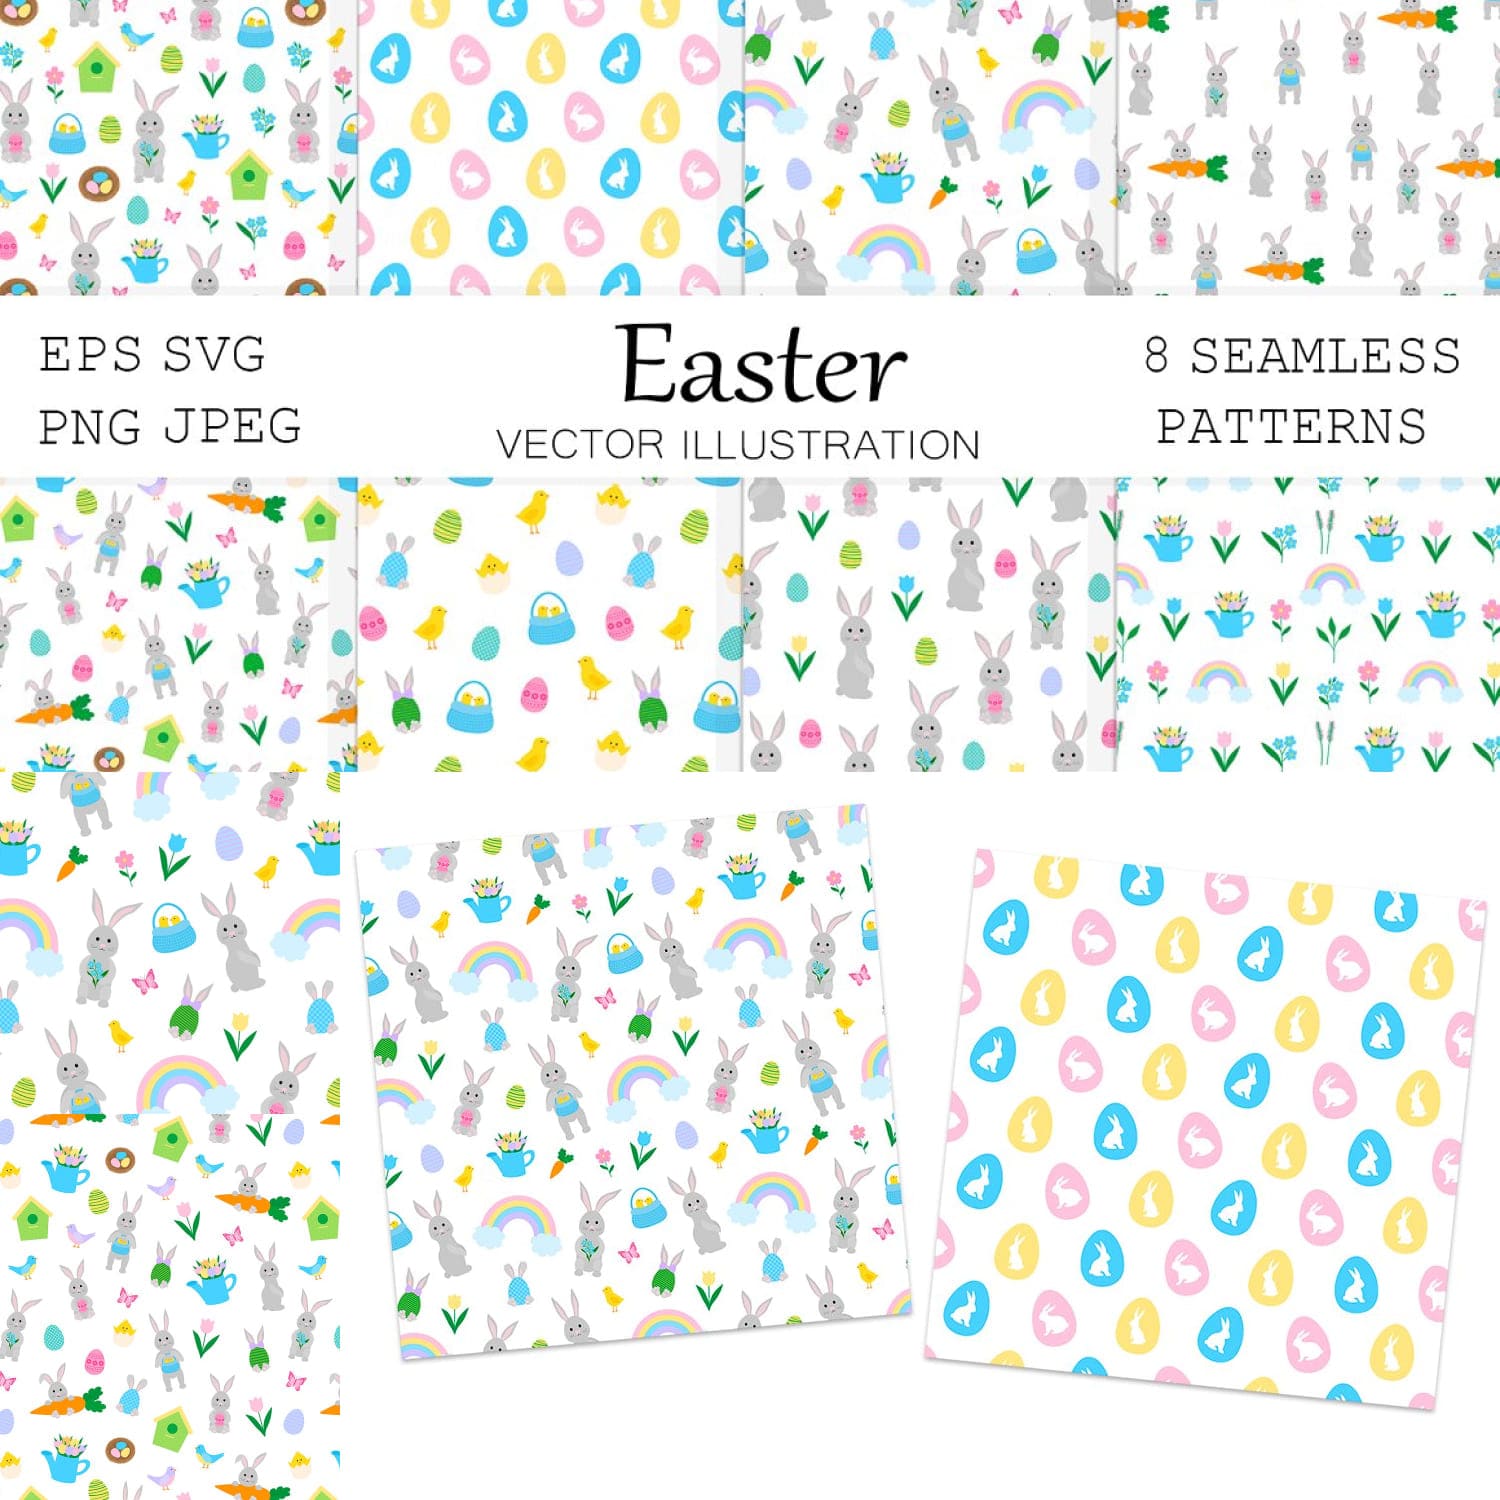 Easter Pattern - main image preview.